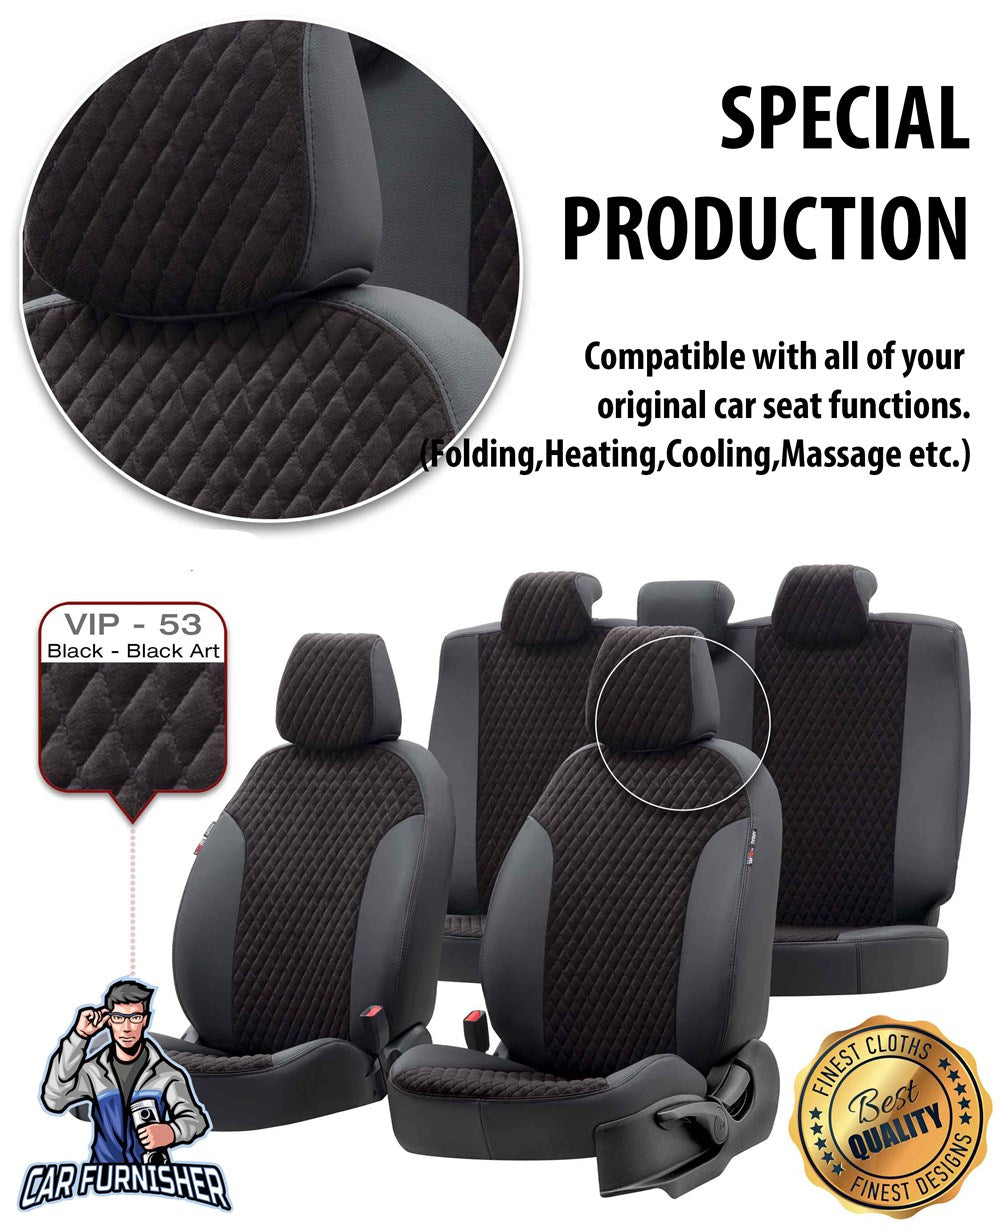 Isuzu N35 Seat Cover Amsterdam Foal Feather Design Smoked Black Leather & Foal Feather